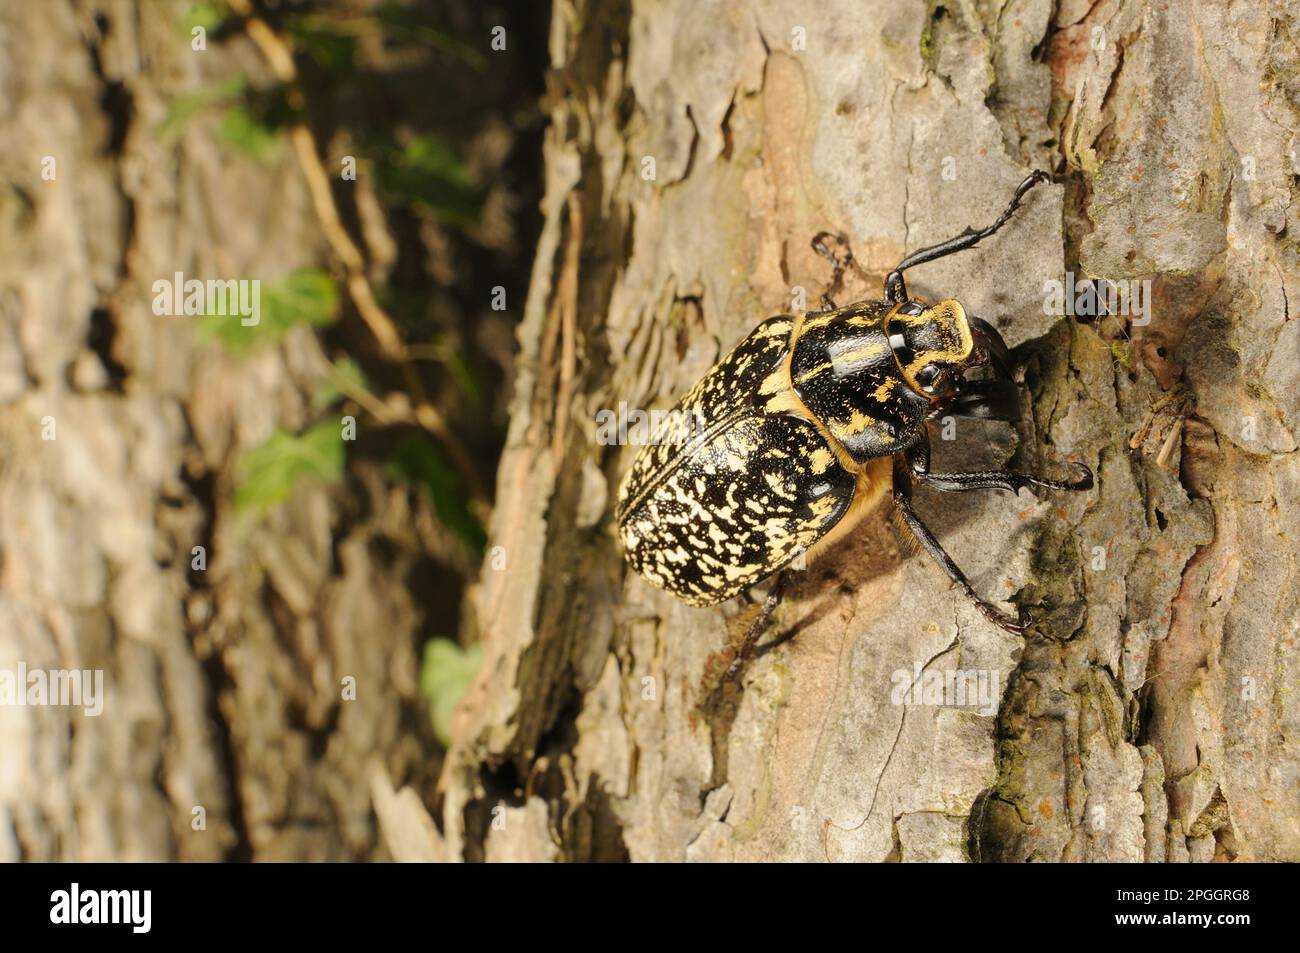 Pine Chafer (Polyphylla fullo) adult male, climbing on pine trunk, Italy Stock Photo